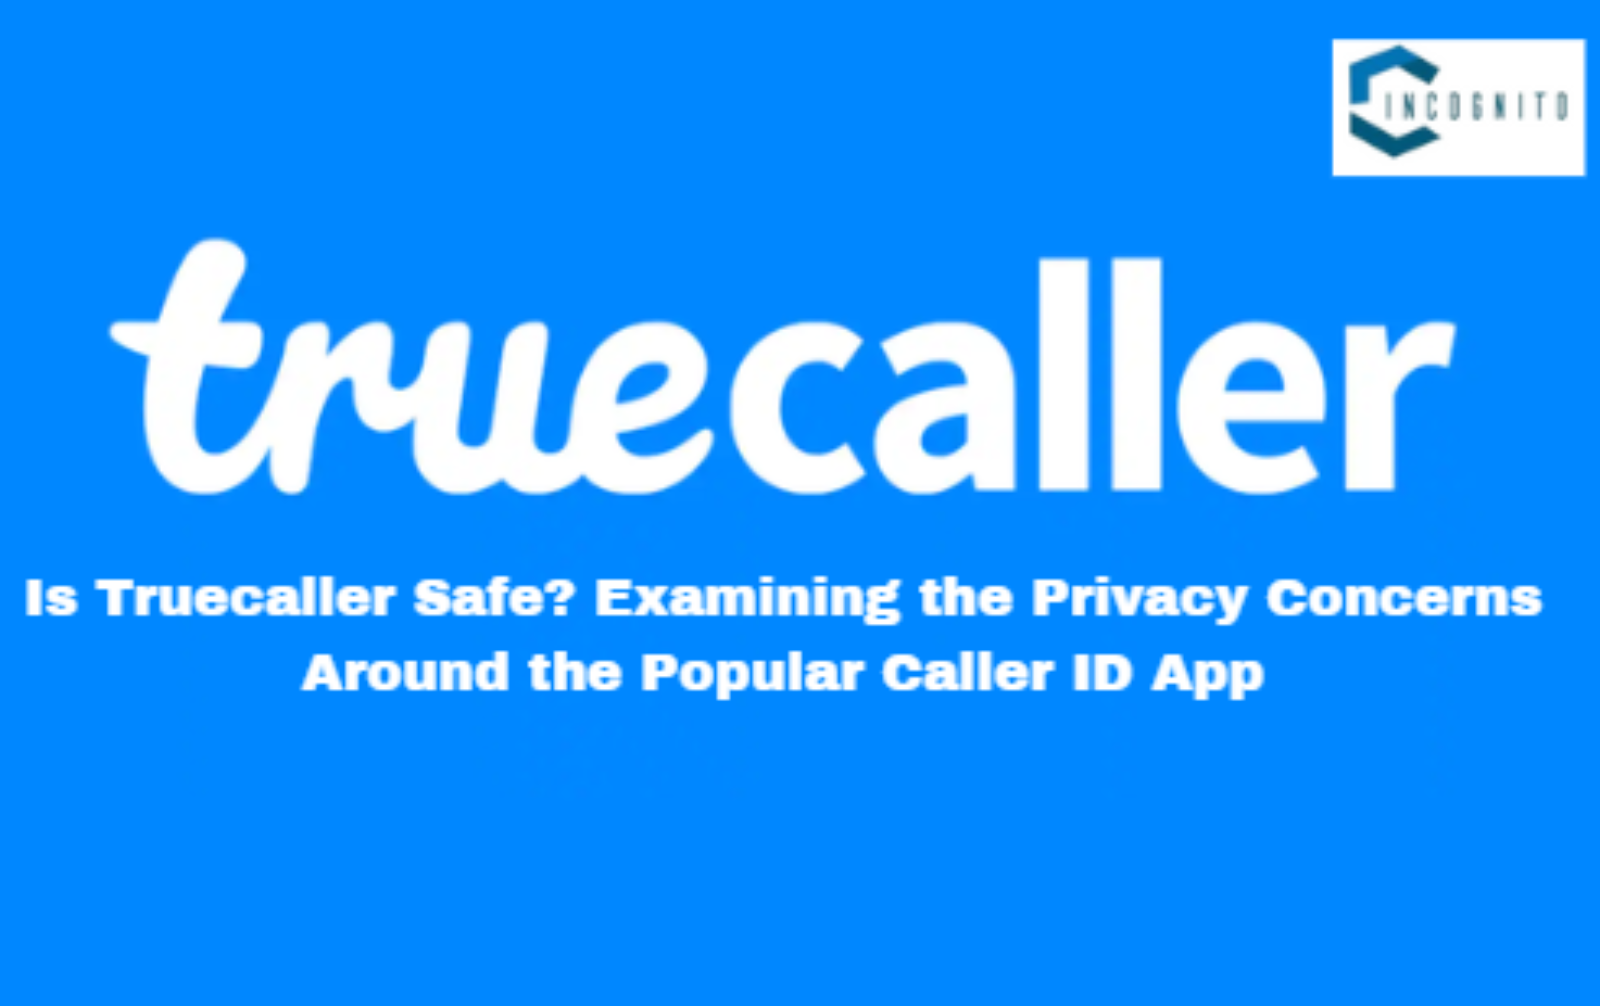 Is Truecaller Safe? Examining the Privacy Concerns Around the Popular Caller ID App